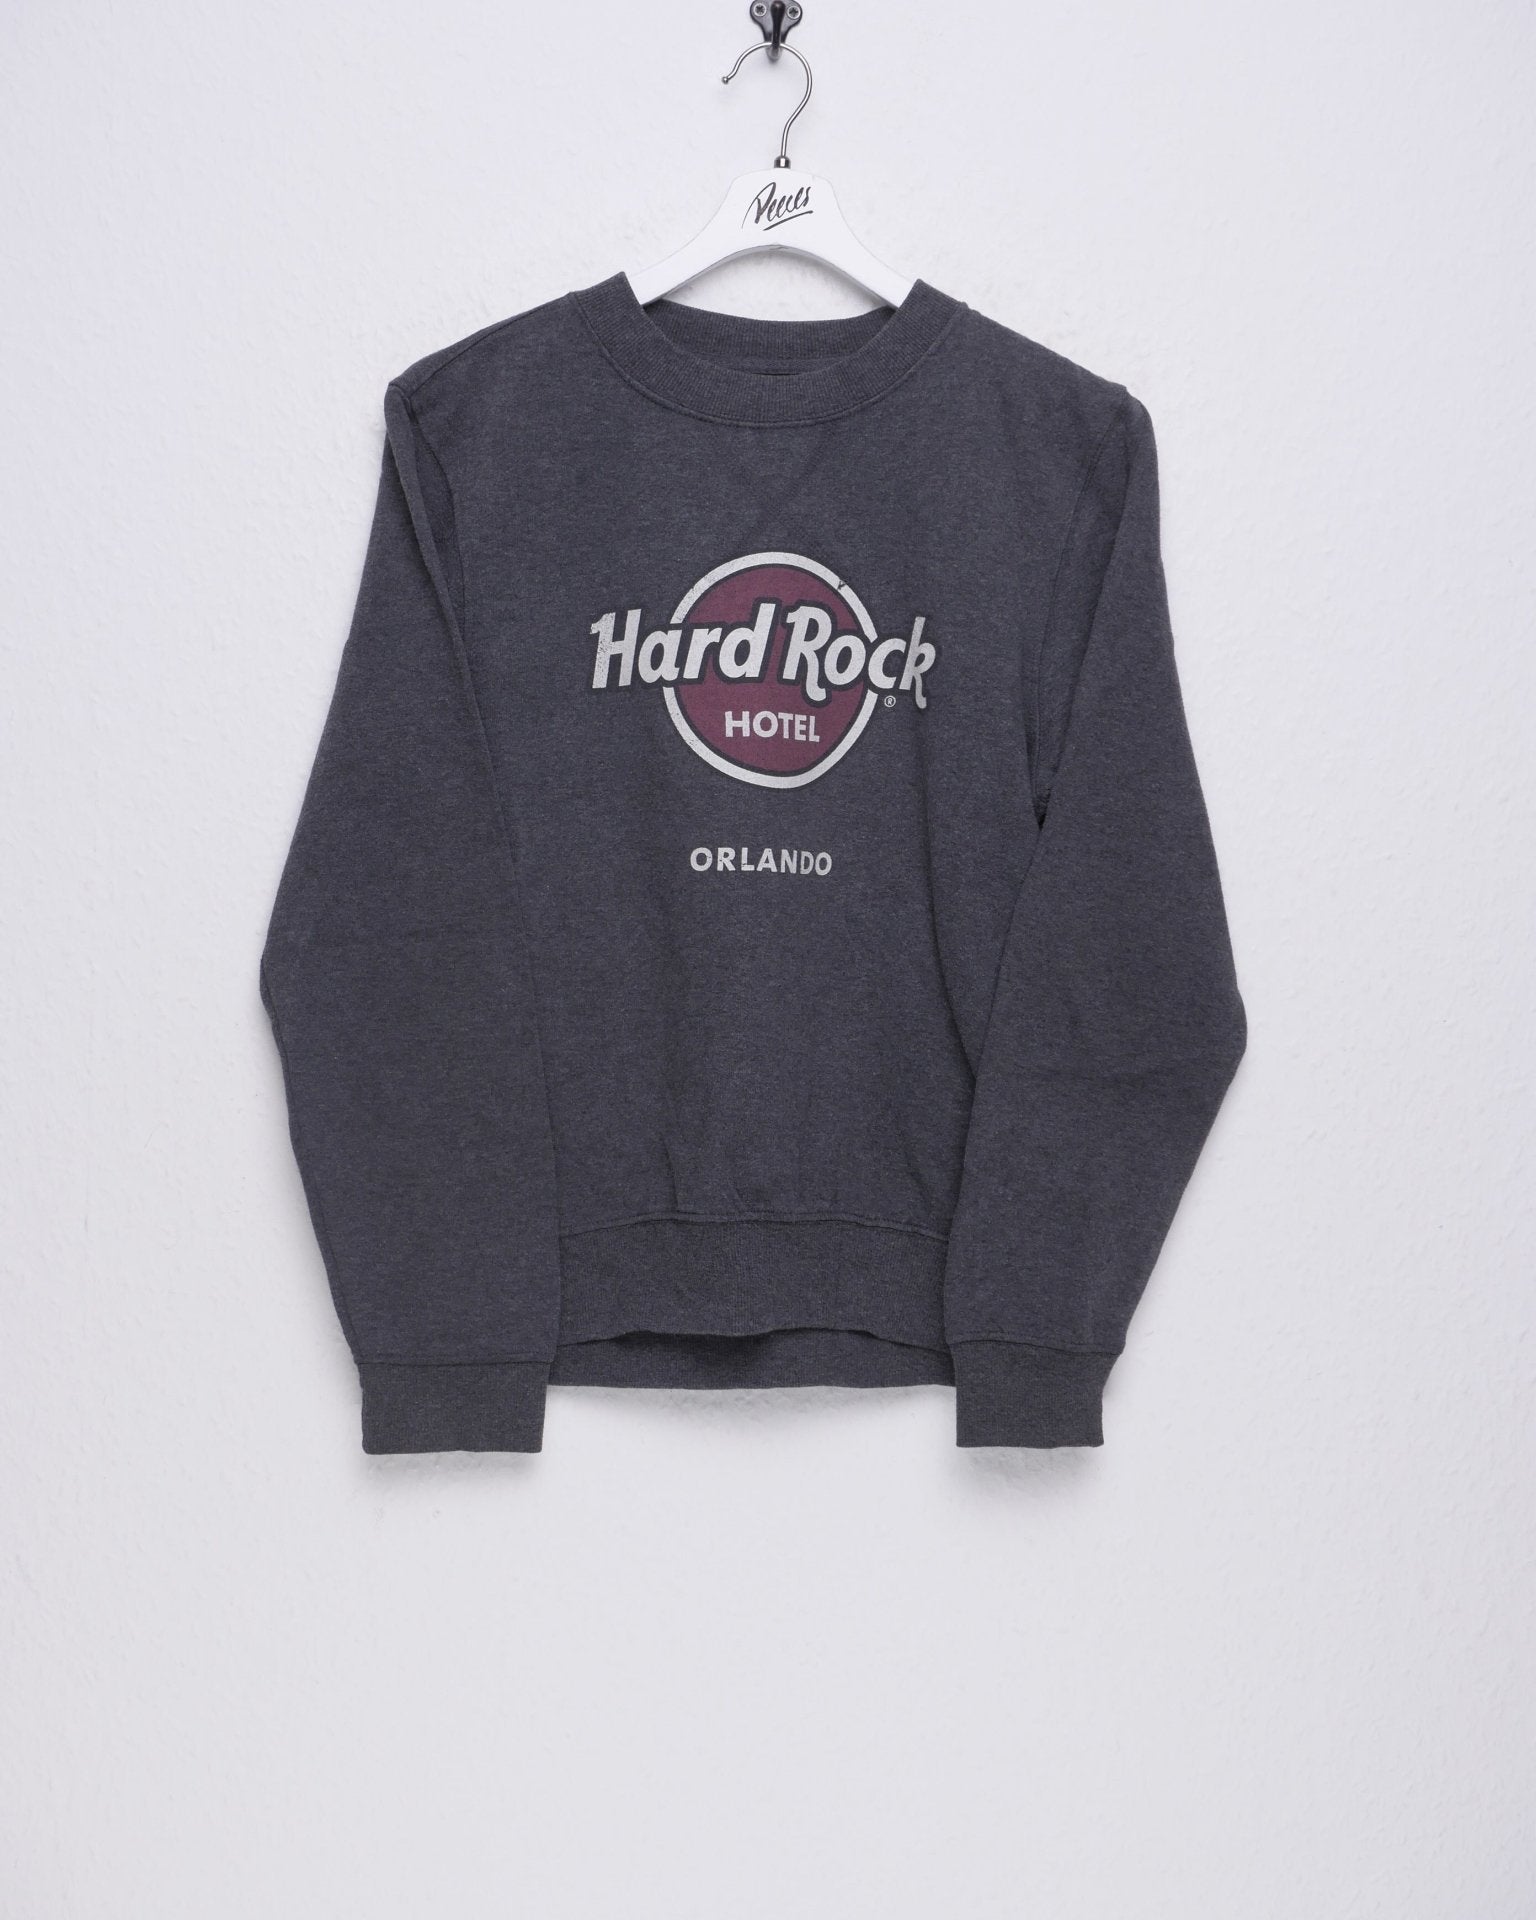 Hard Rock Hotel printed Graphic Vintage Sweater - Peeces